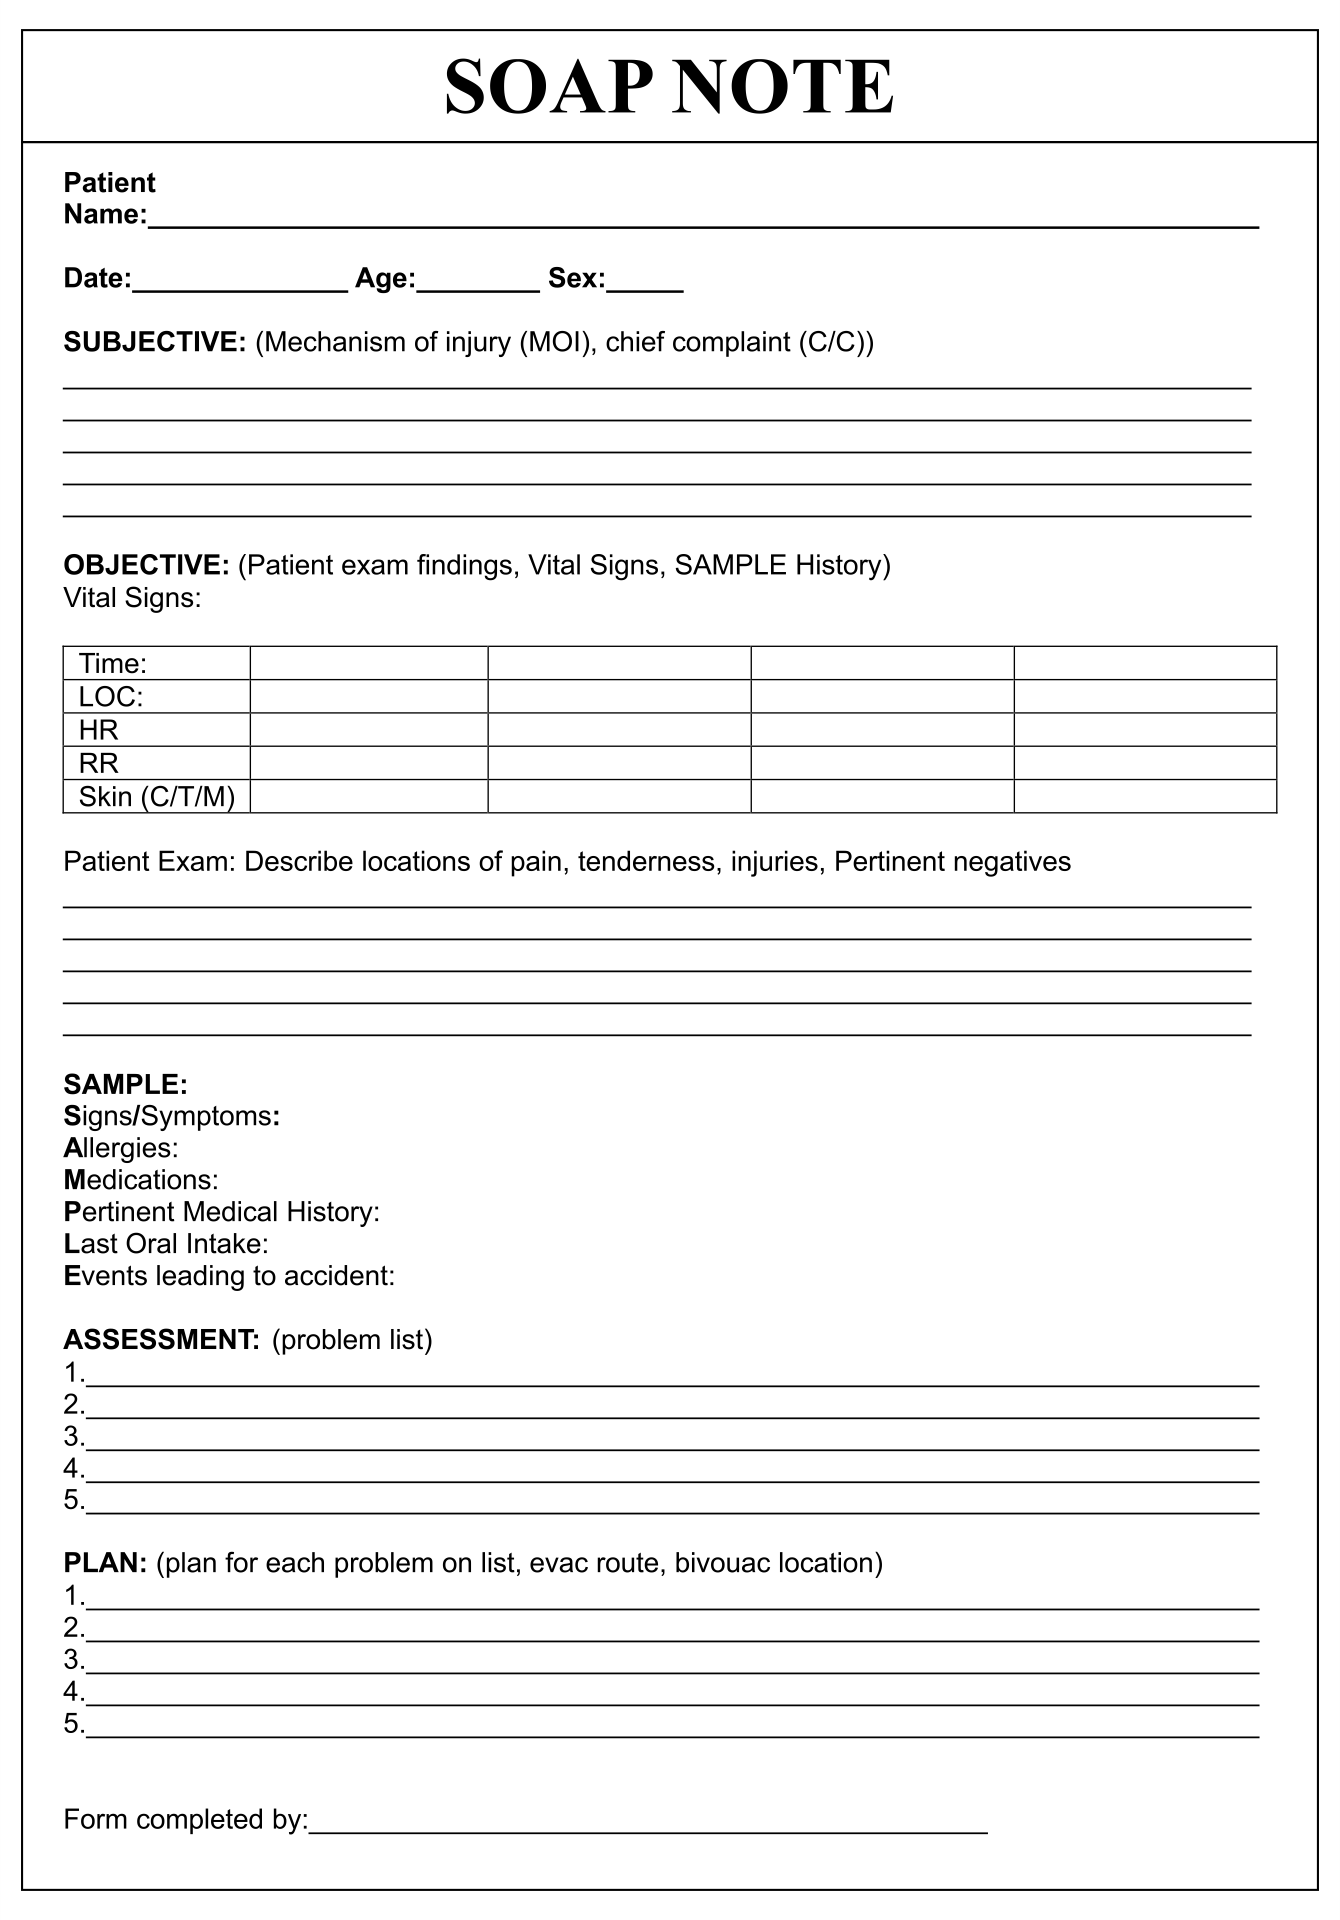 Counseling Soap Note Templates 10 Free PDF Printables Printablee